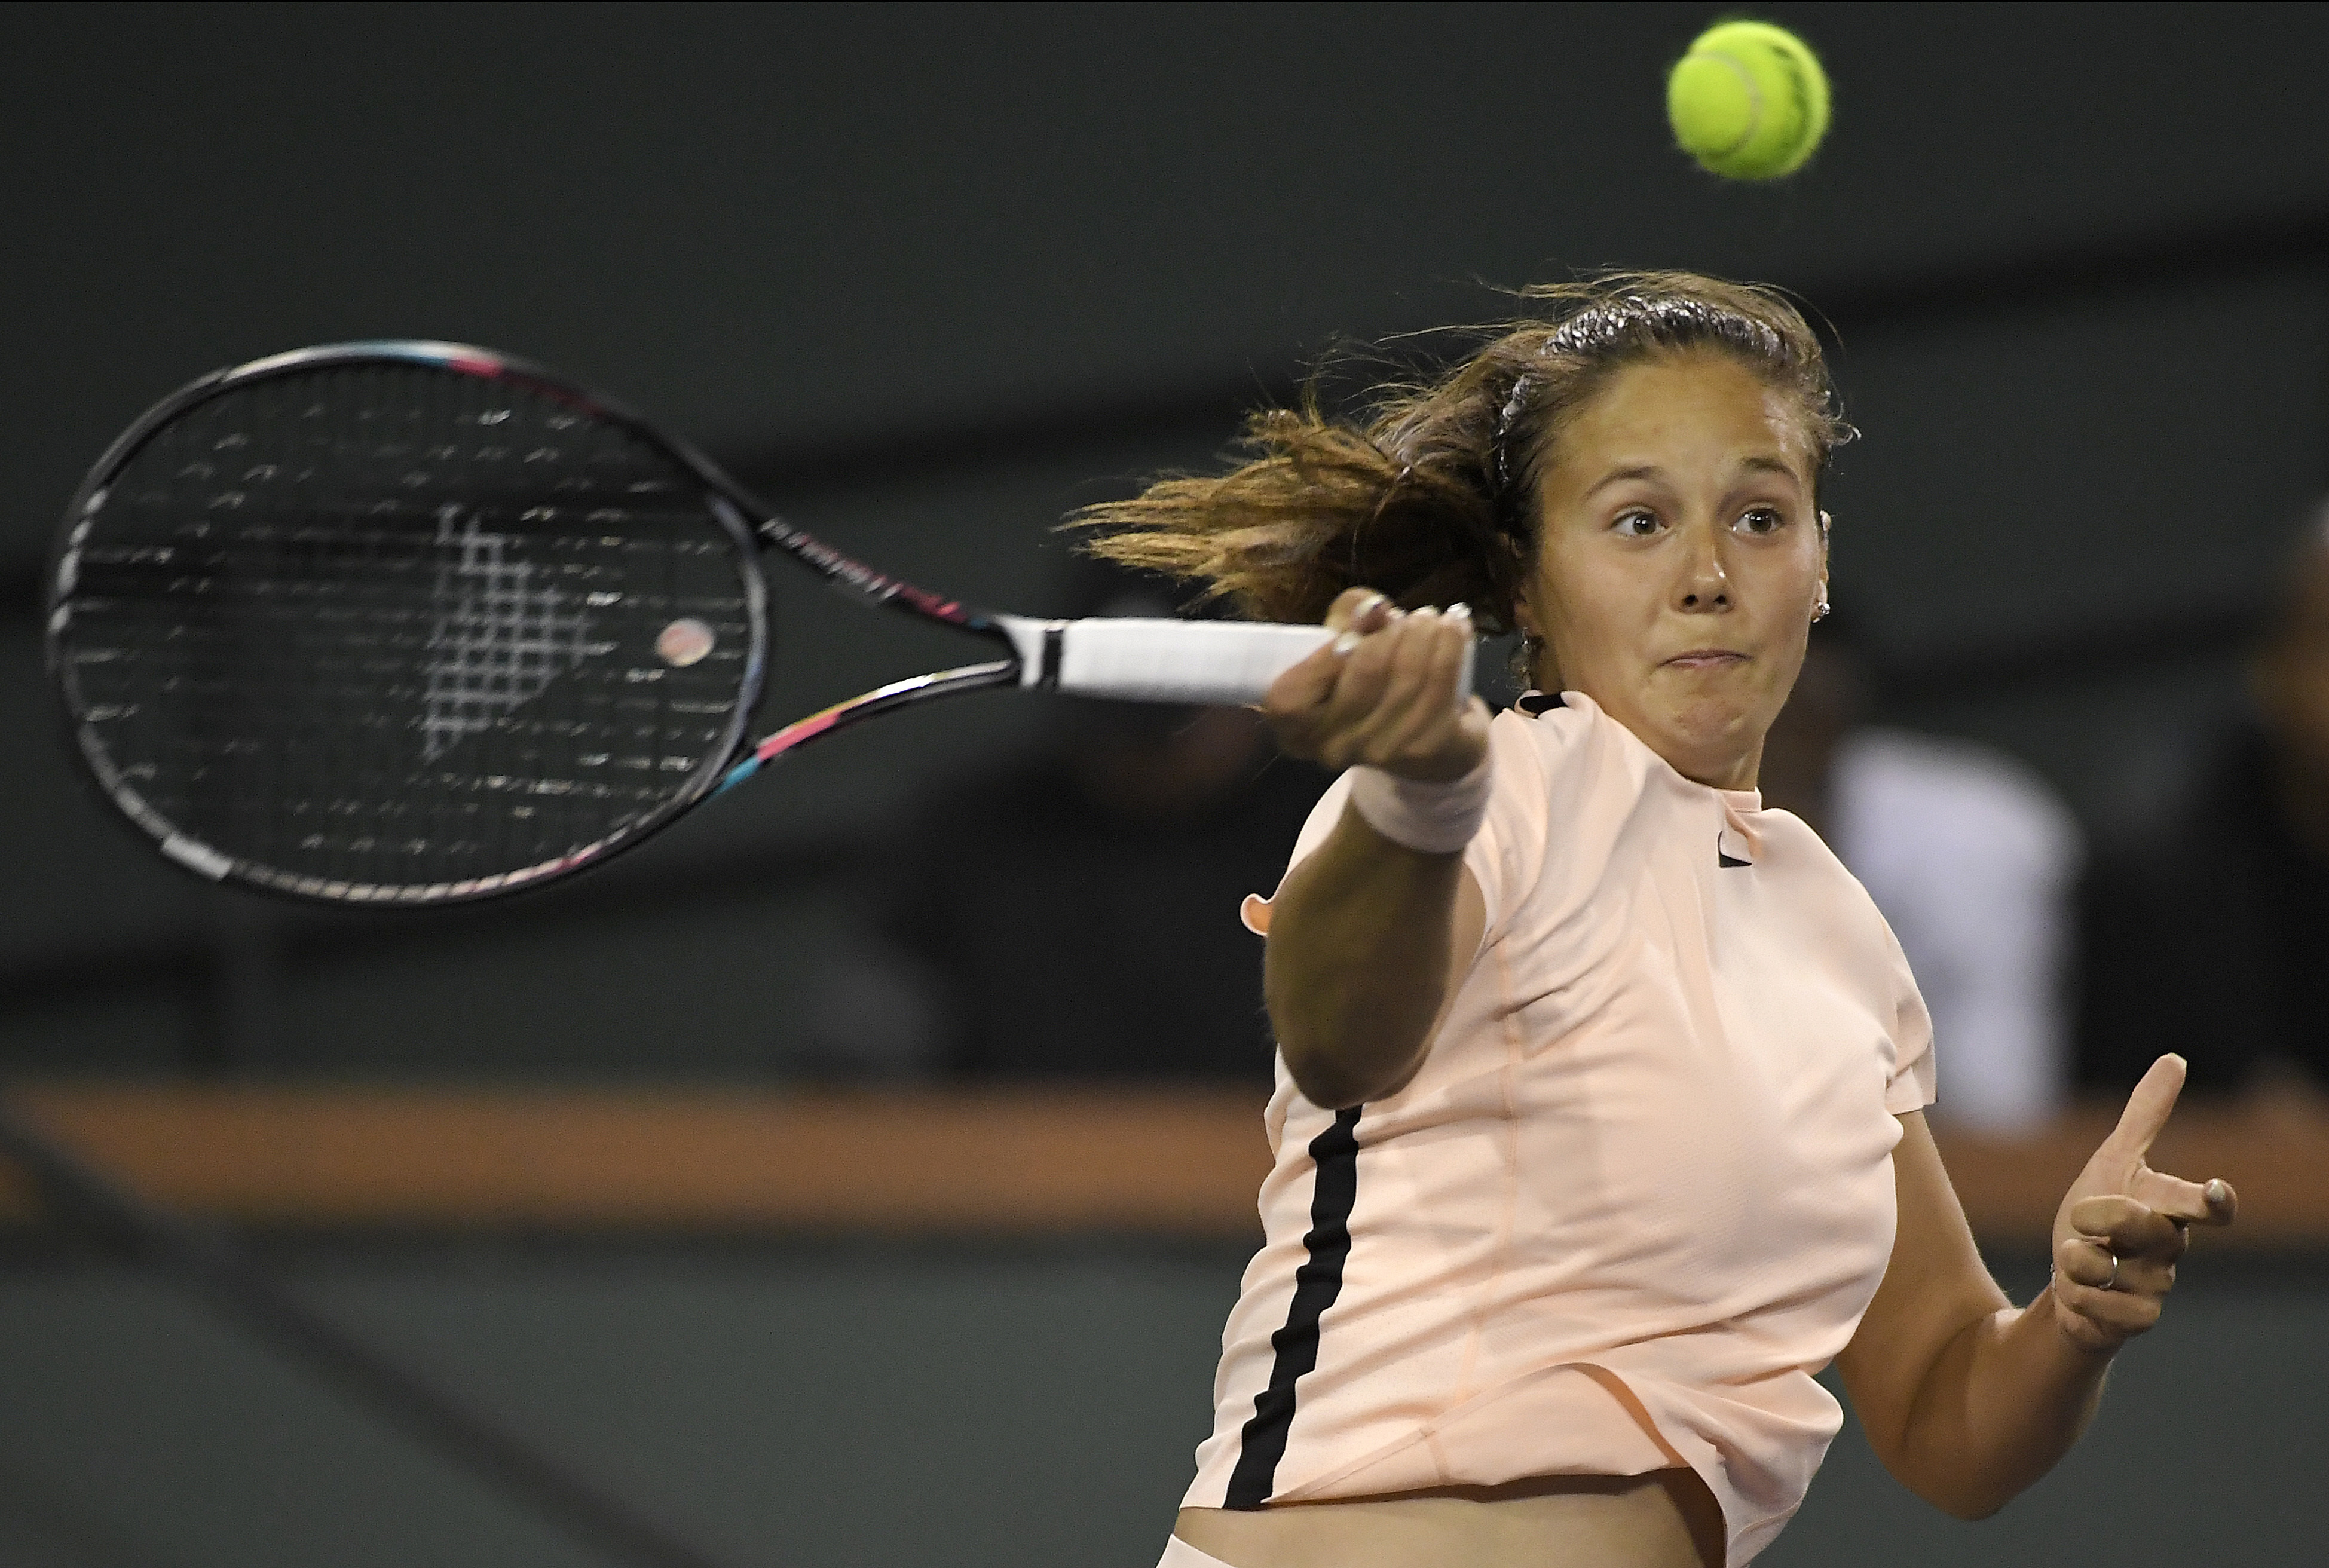 Charleston is known for launching new stars into the WTA stratosphere